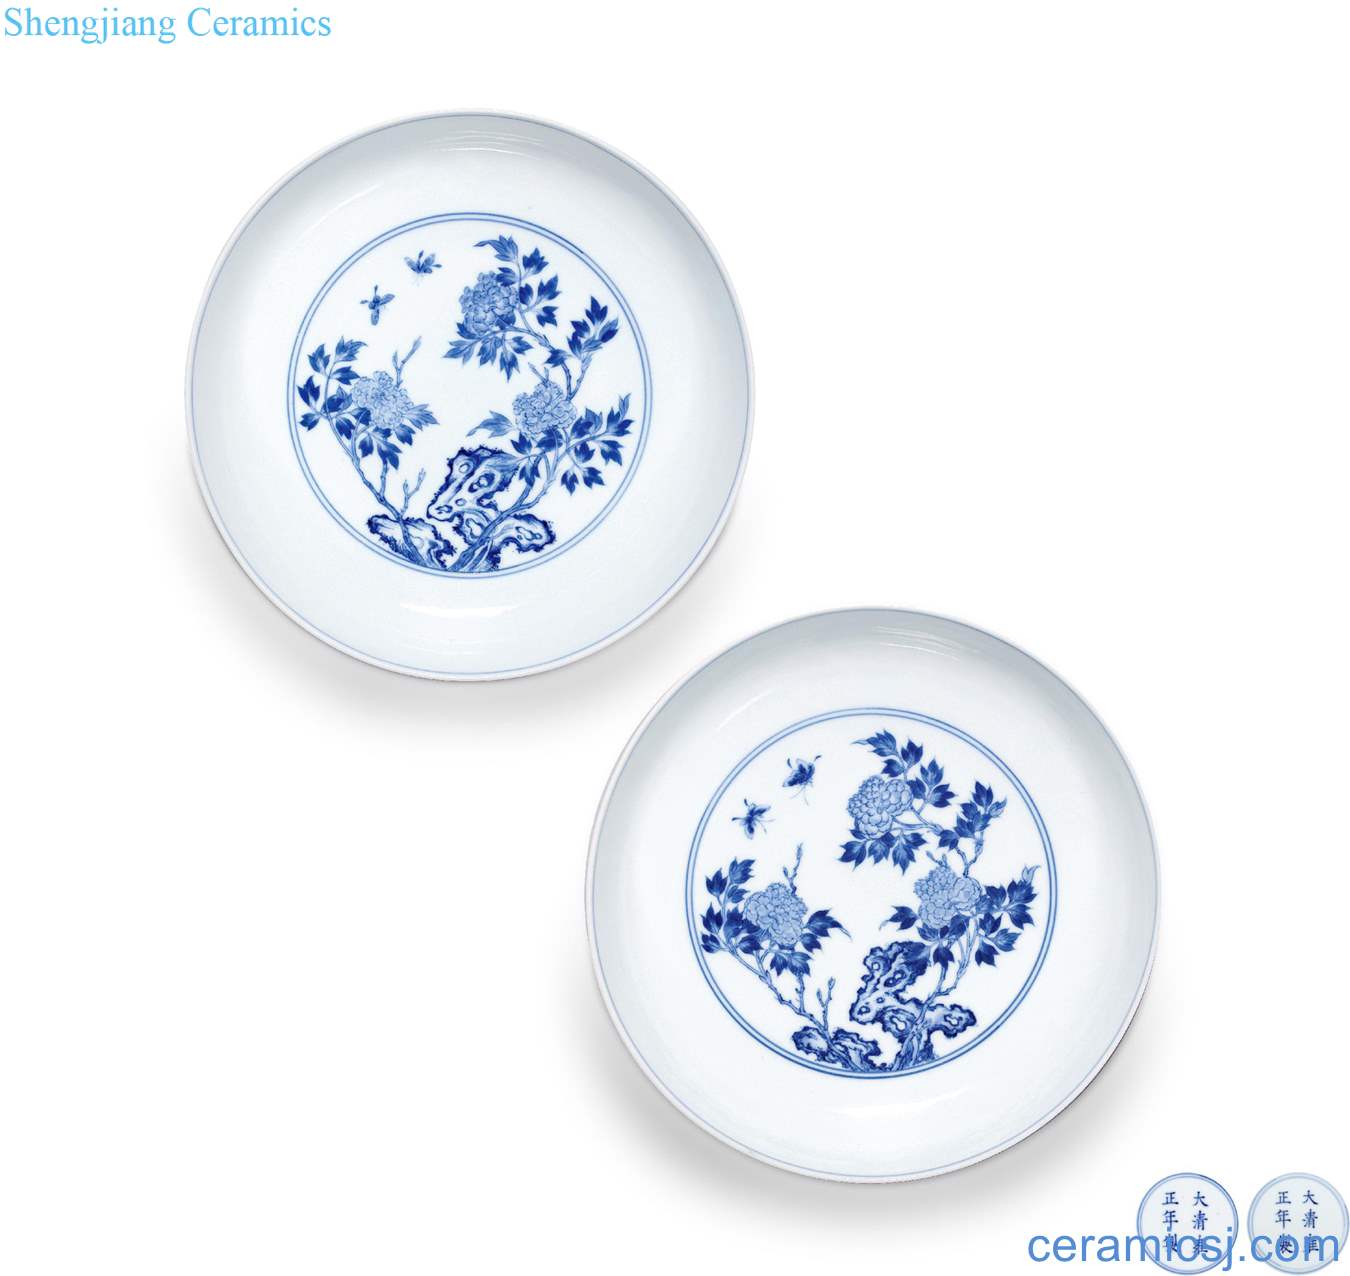 Qing yongzheng Blue and white life of rock flowers butterfly figure plate (a)